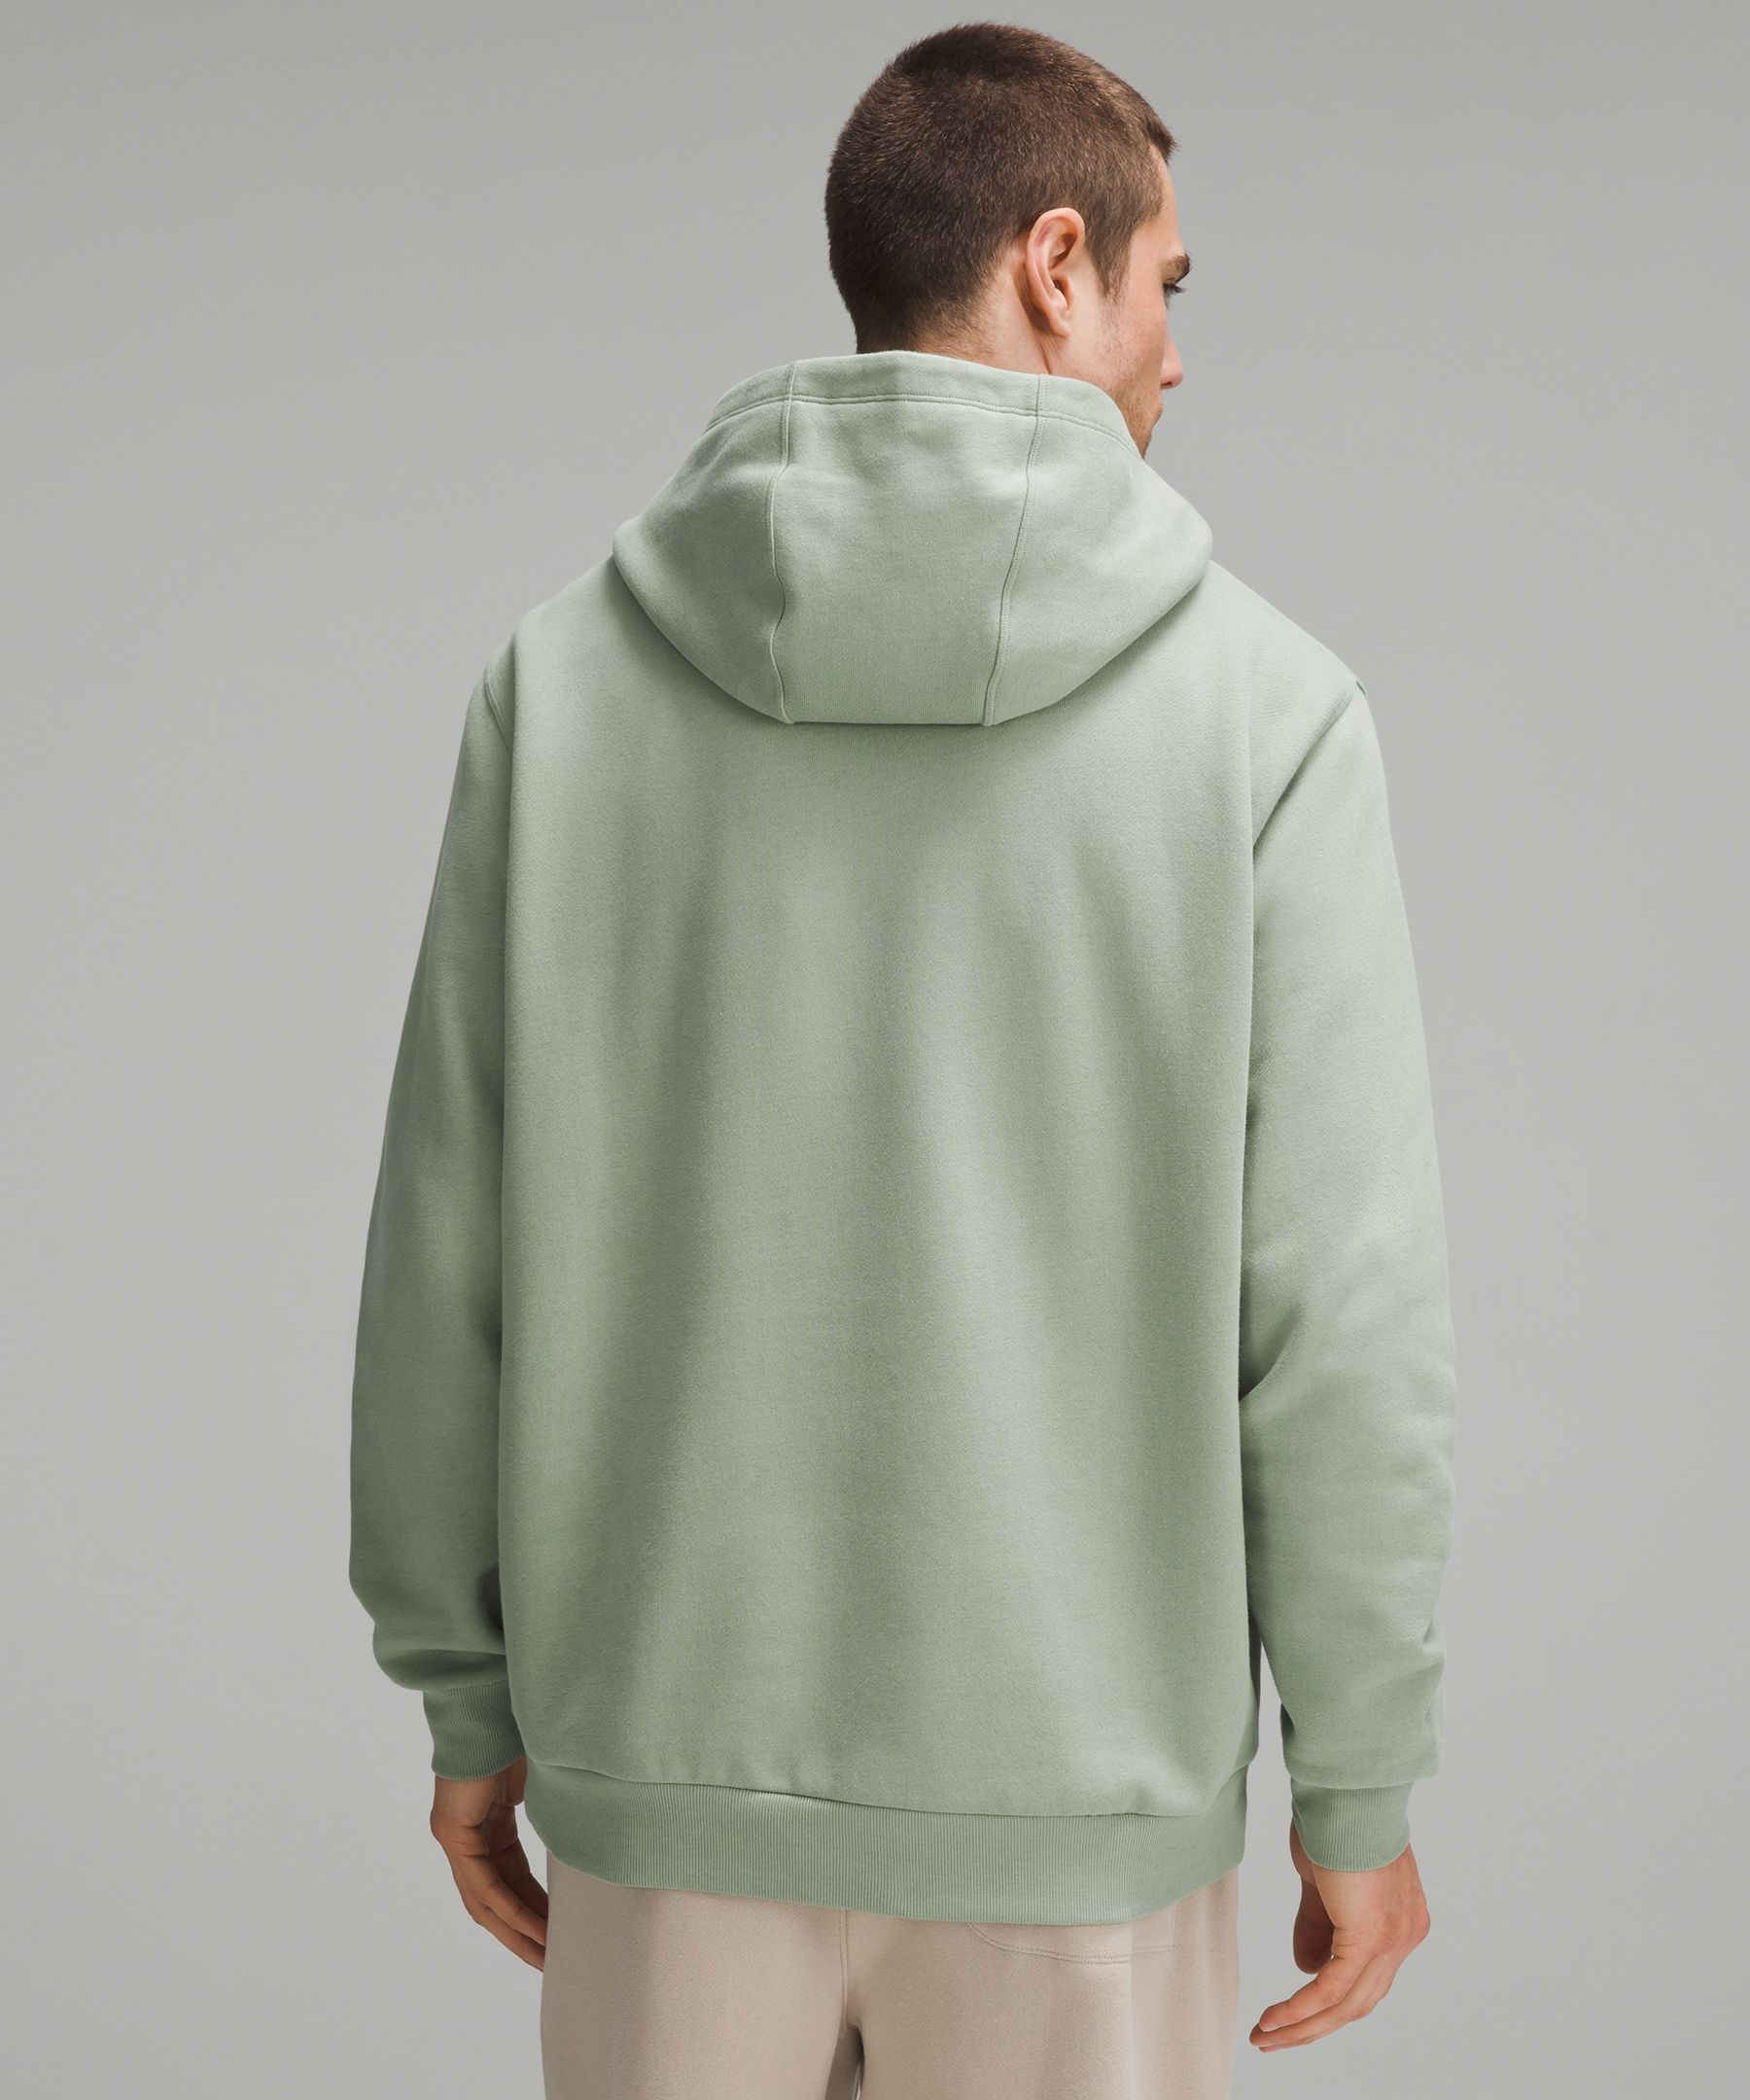 Lululemon Steady State Hoodie Color Natural Ivory Size: XL. Retail $128.00  *NEW